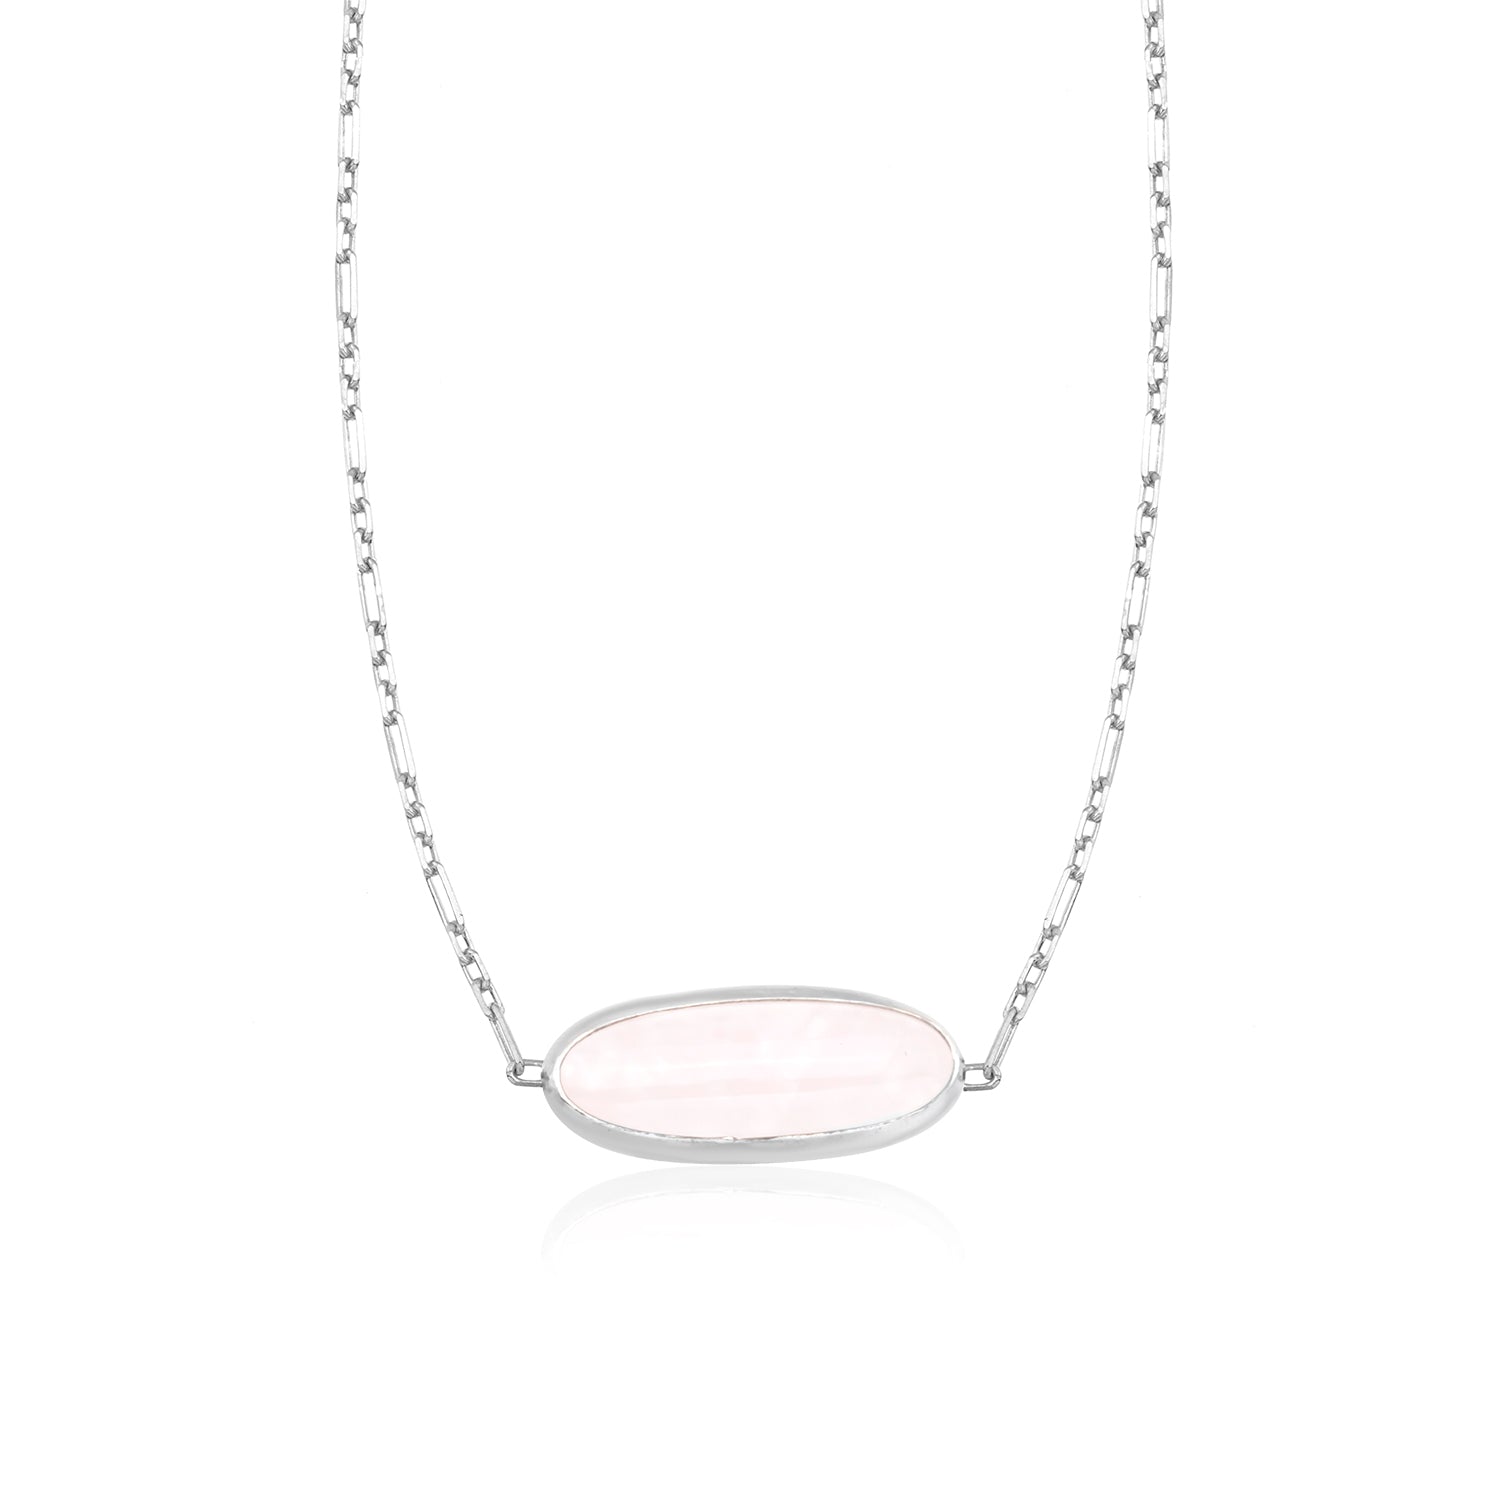 pearl oval necklace 602Lab